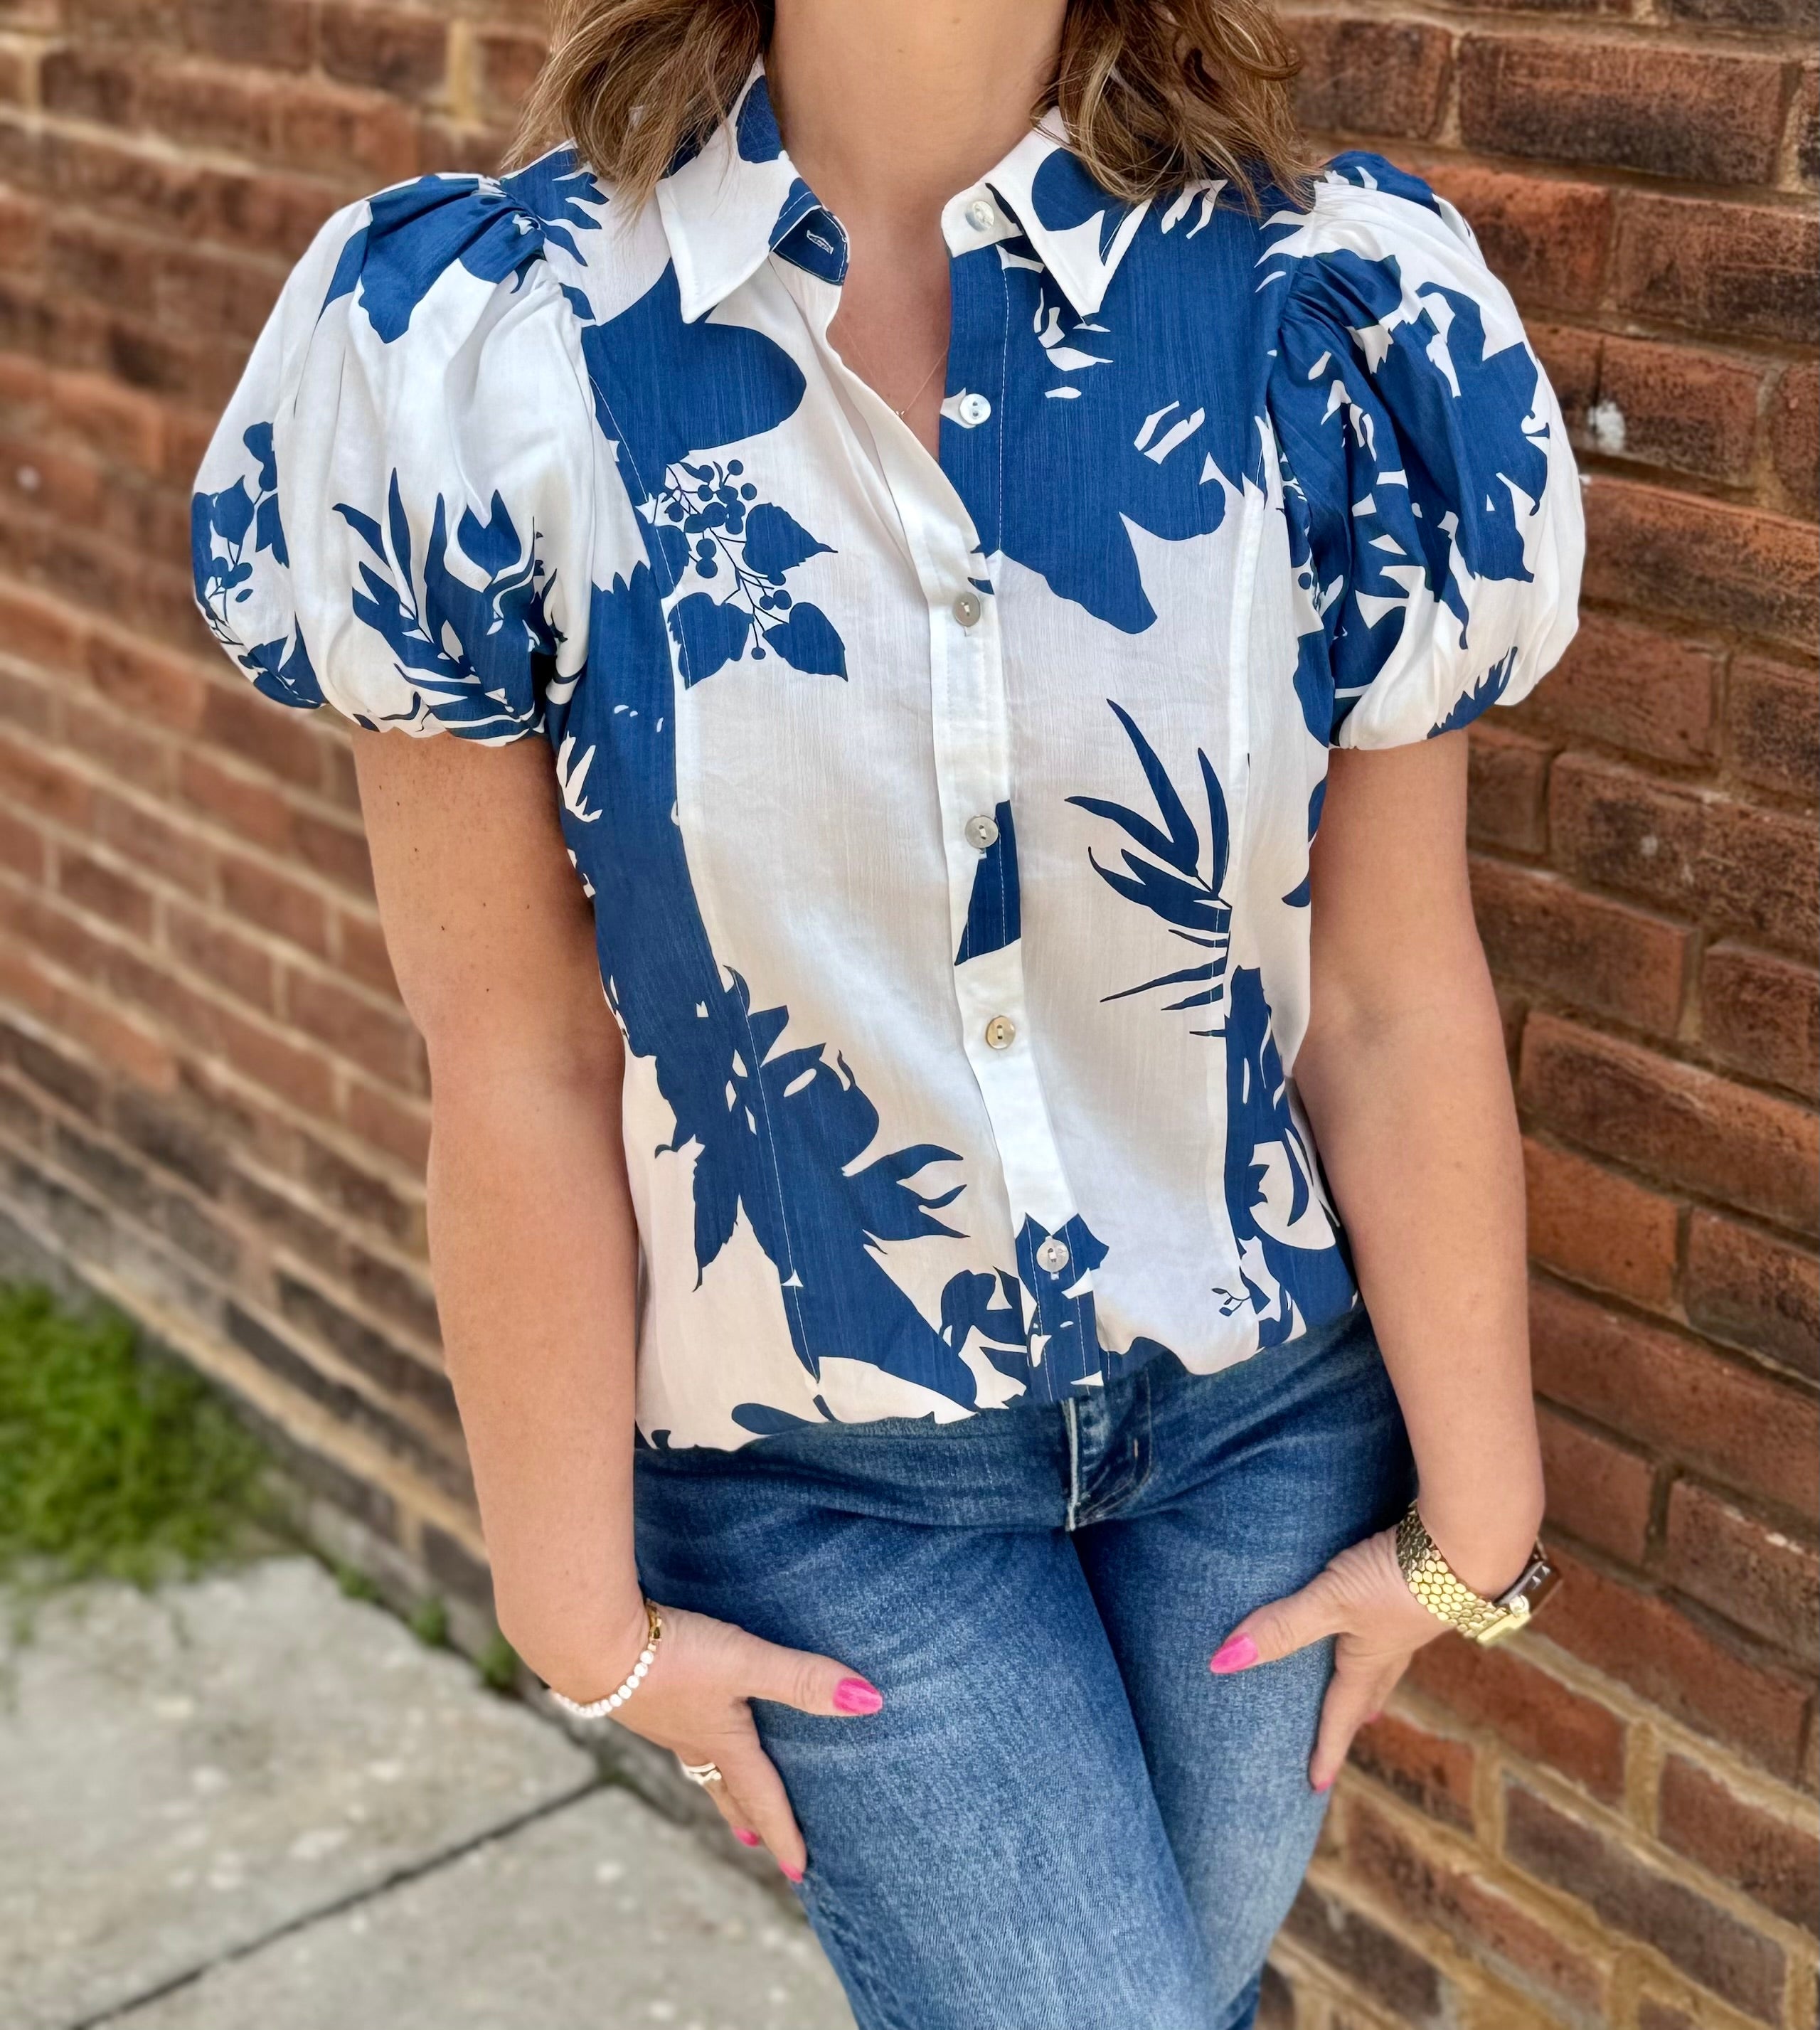 Navy & White Floral Top